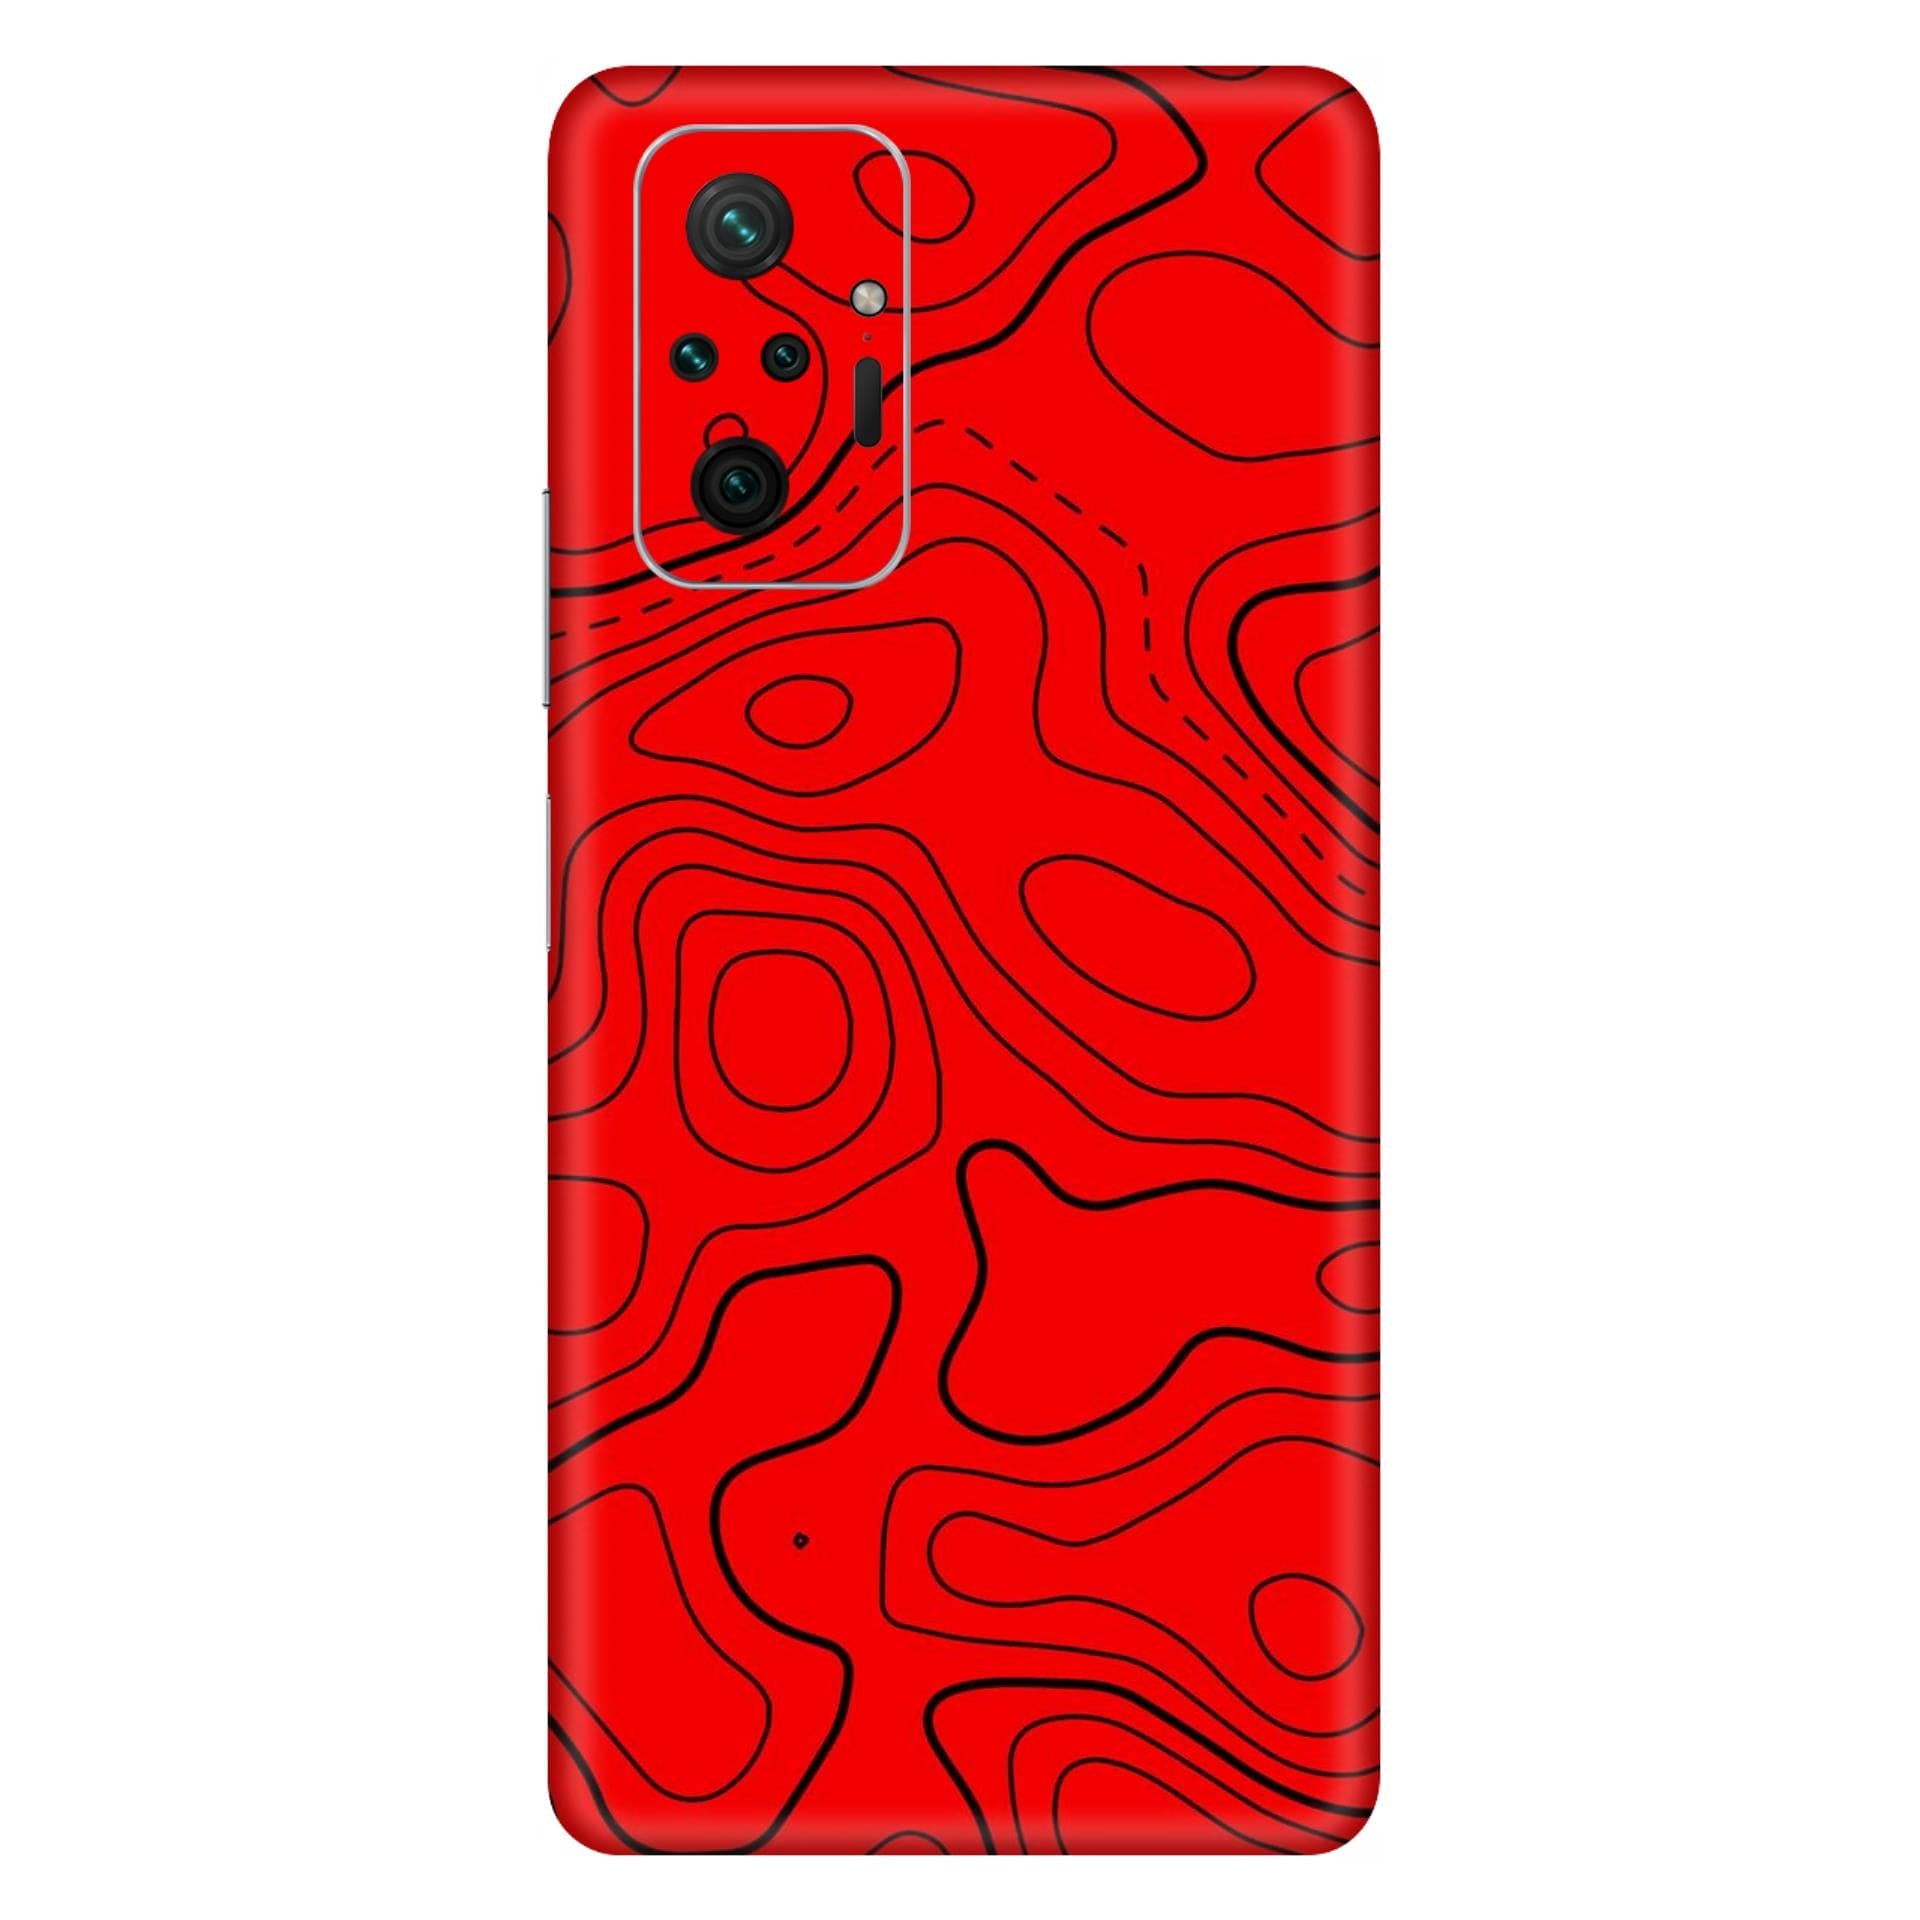 Redmi Note 10 Pro Max Damascus Red skins